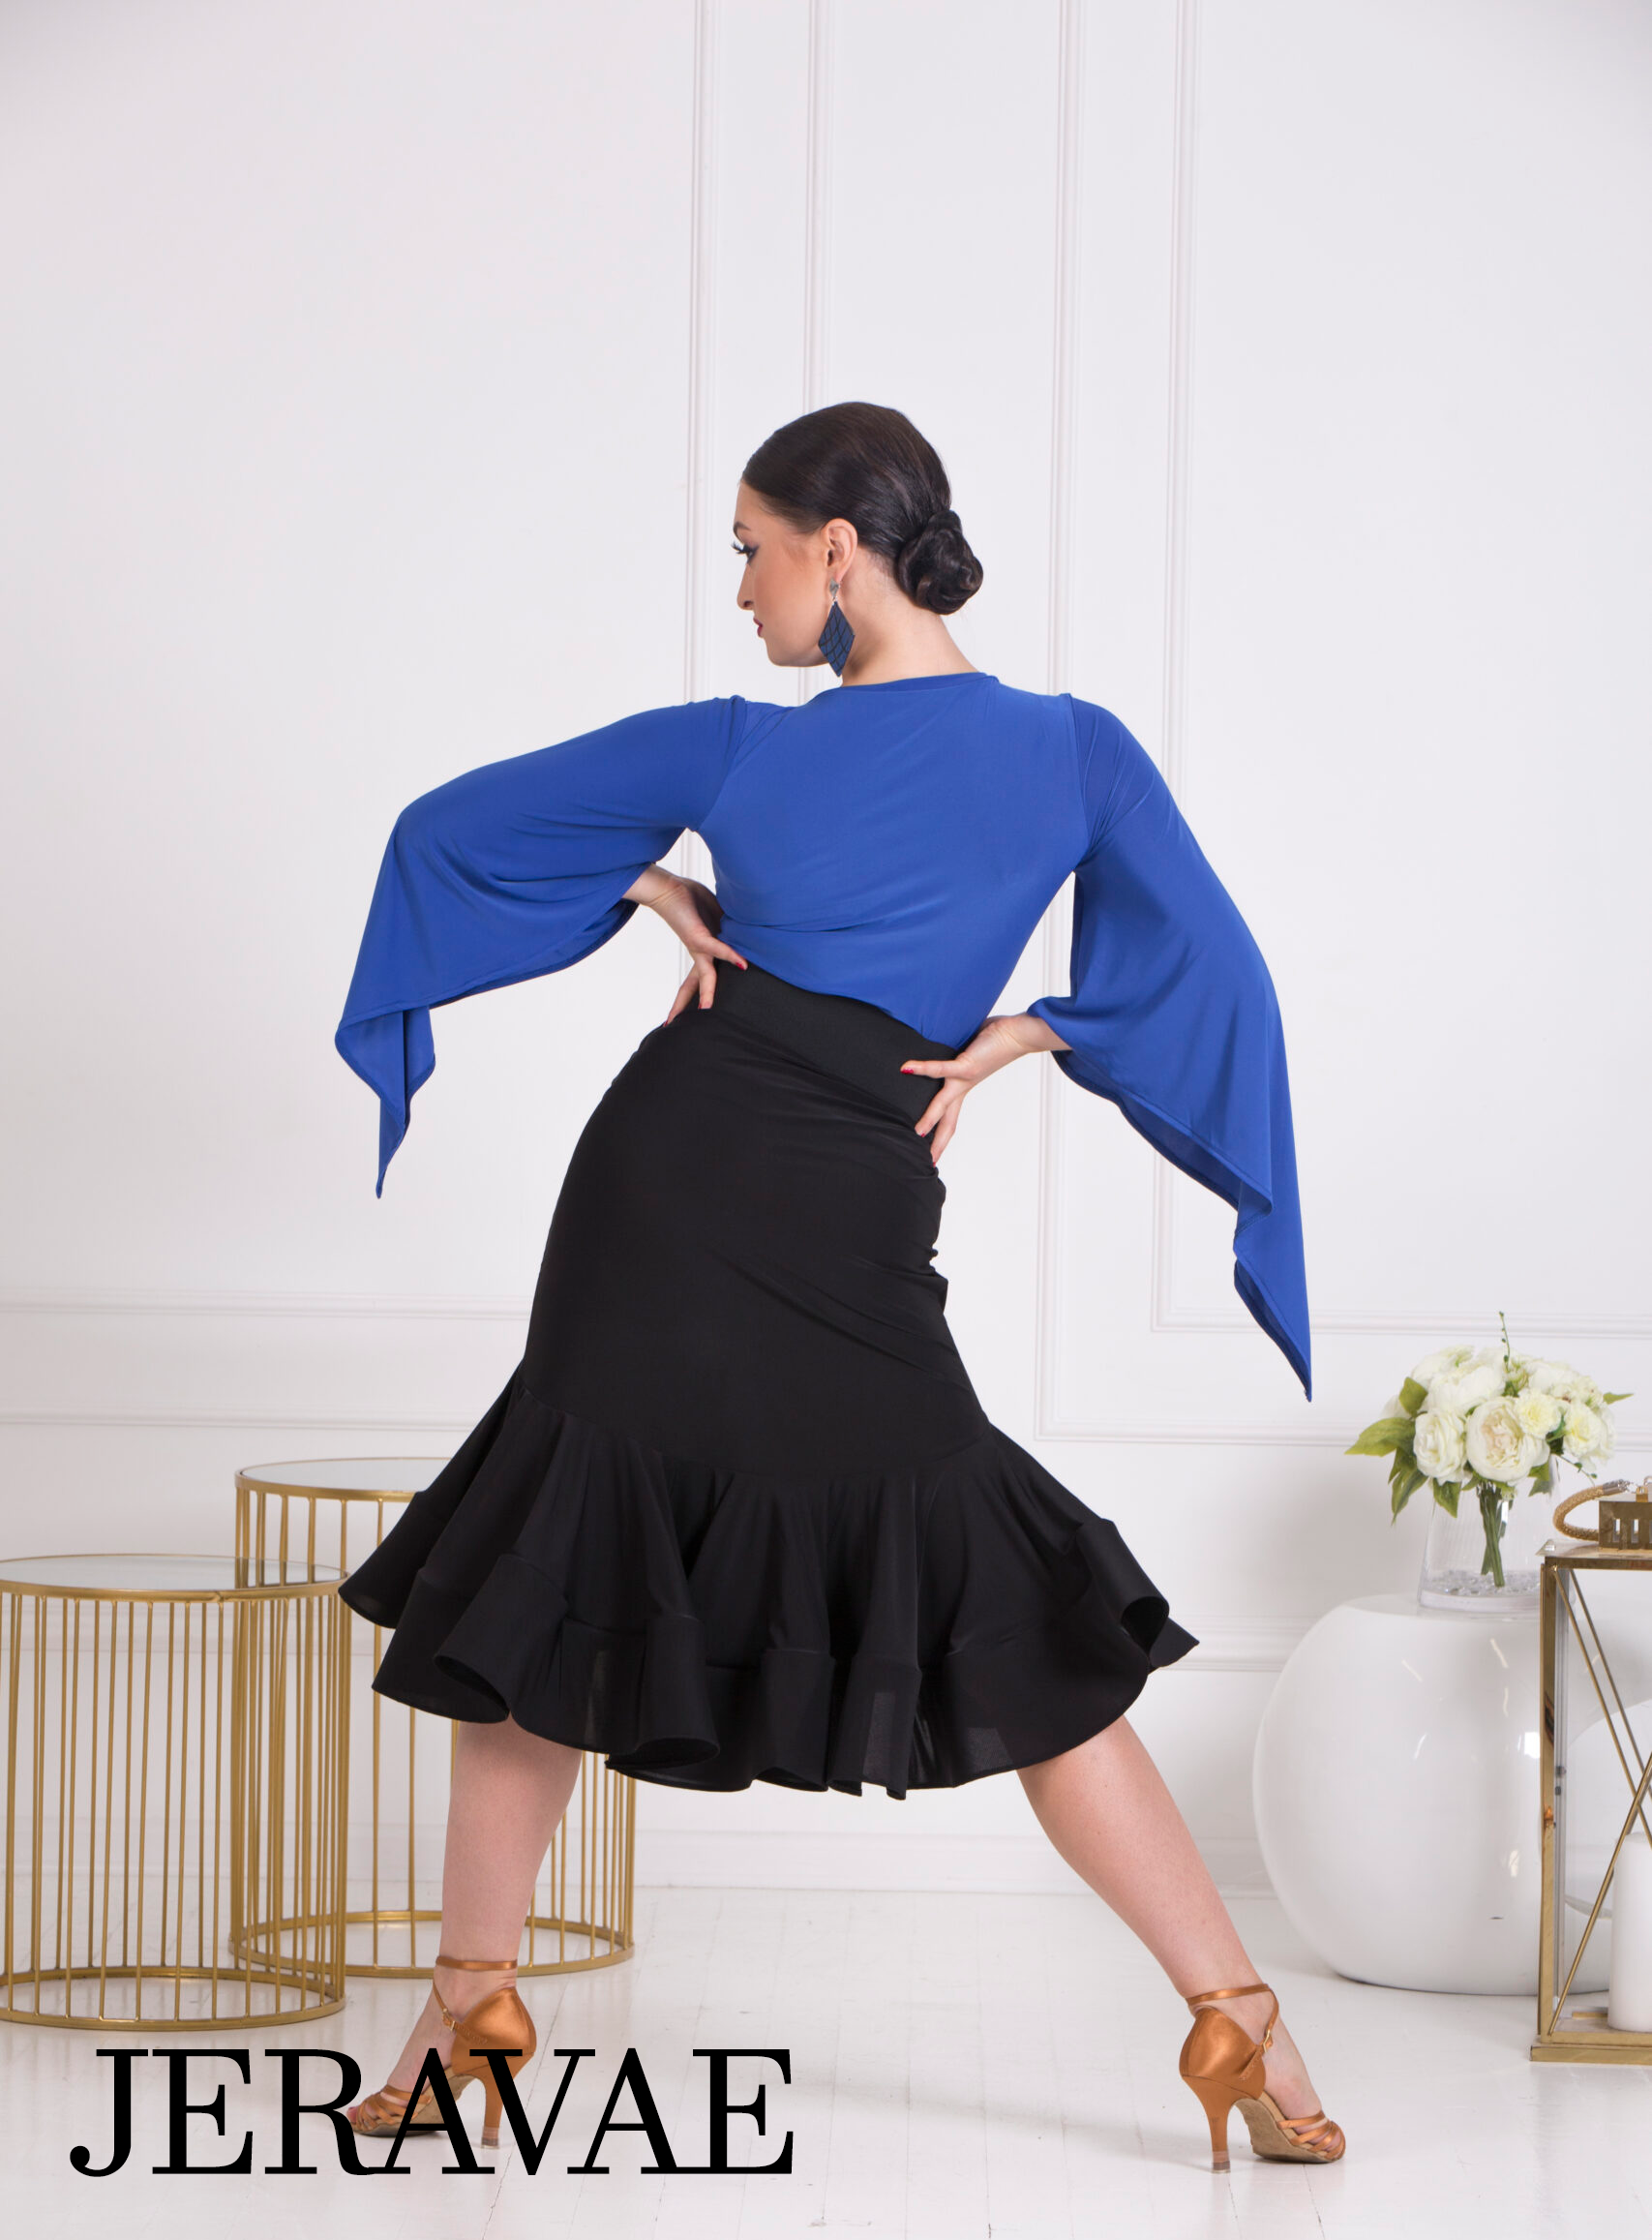 Black skirt and blue shirt for ladies' dance